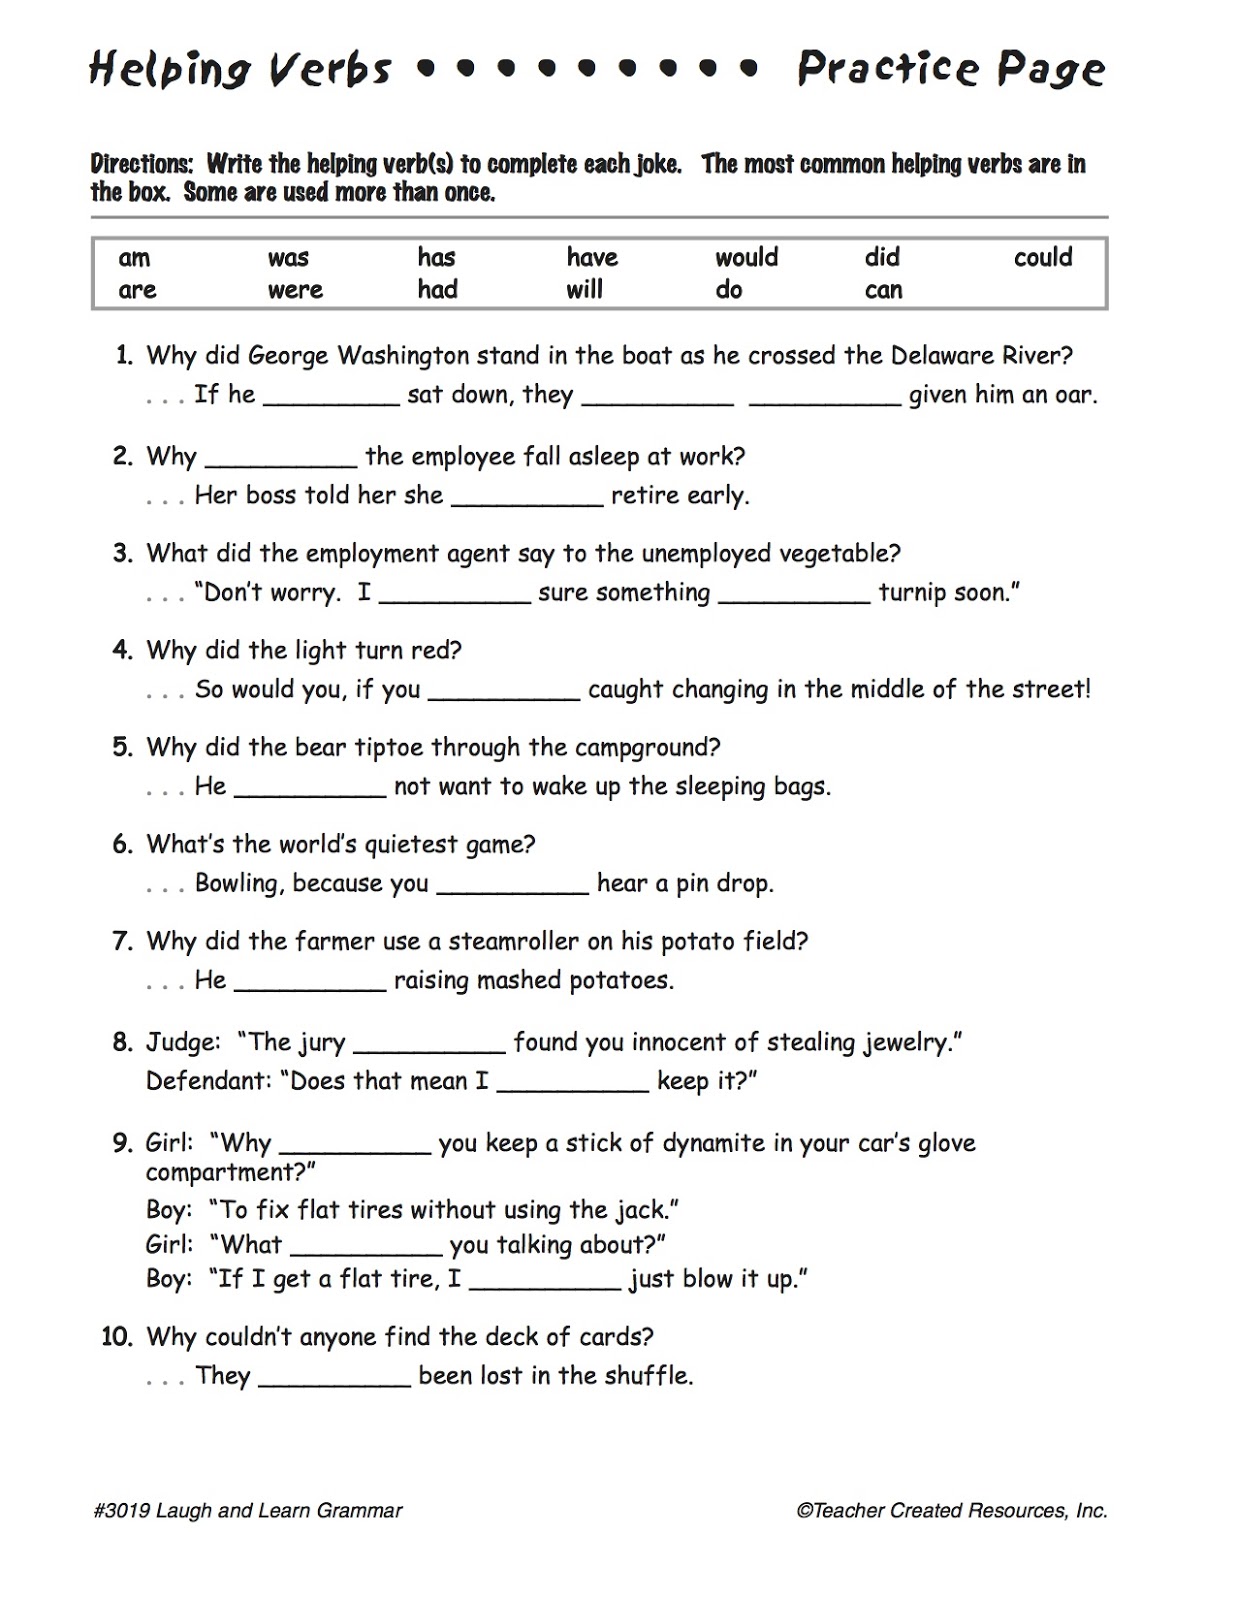 Worksheet On Helping Verbs For Class 4